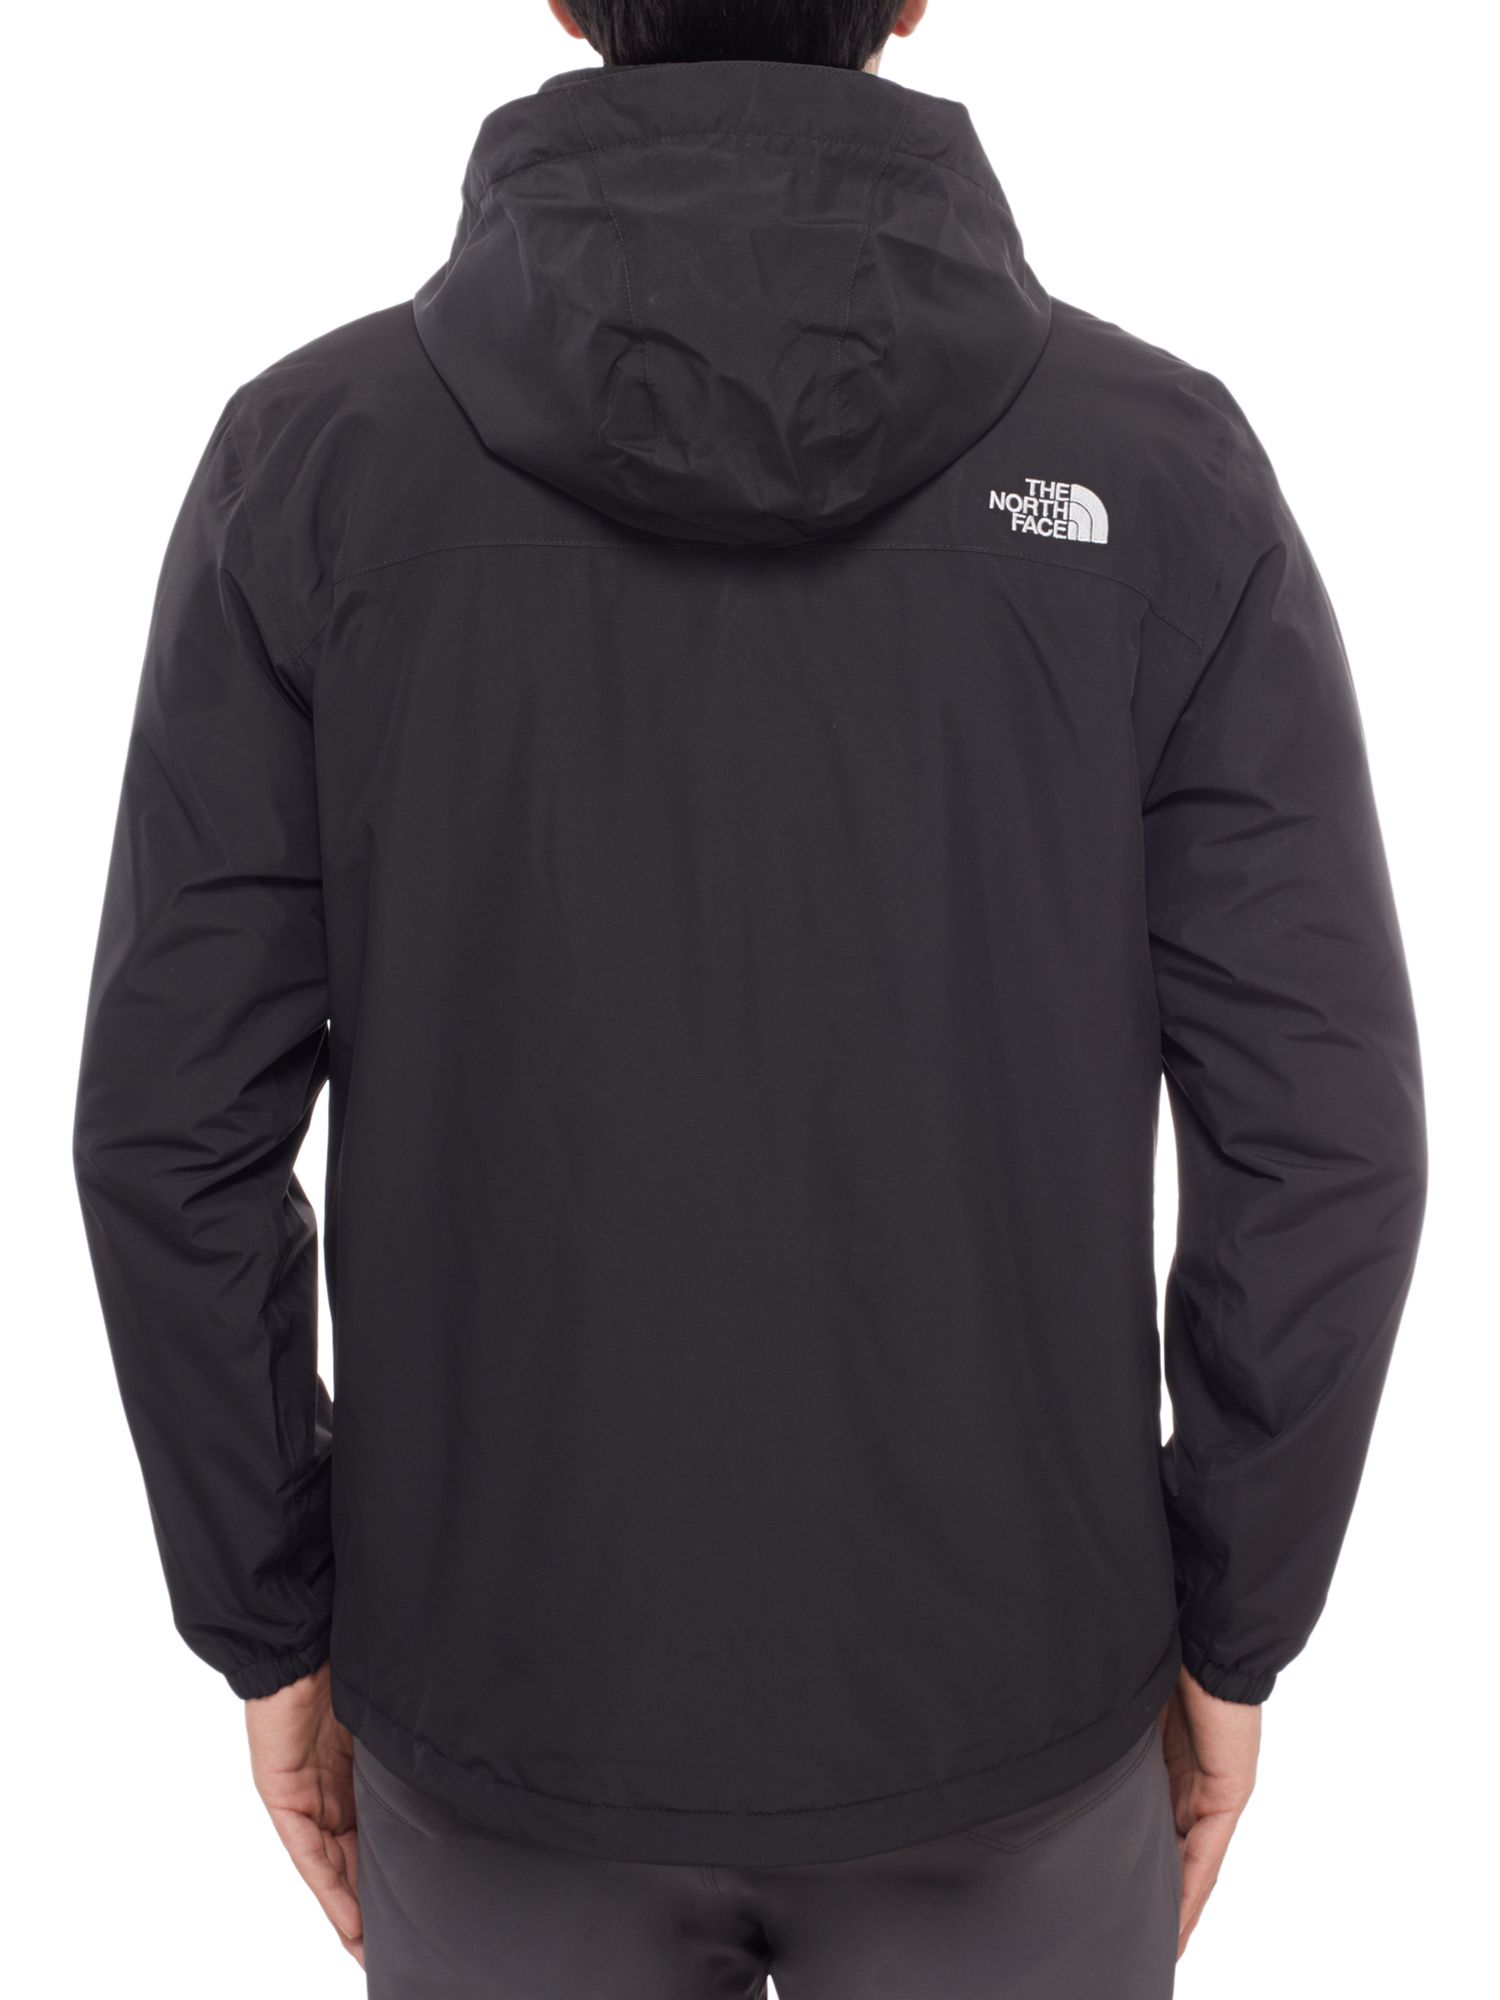 The North Face Resolve Insulated Waterproof Men's Jacket, Black